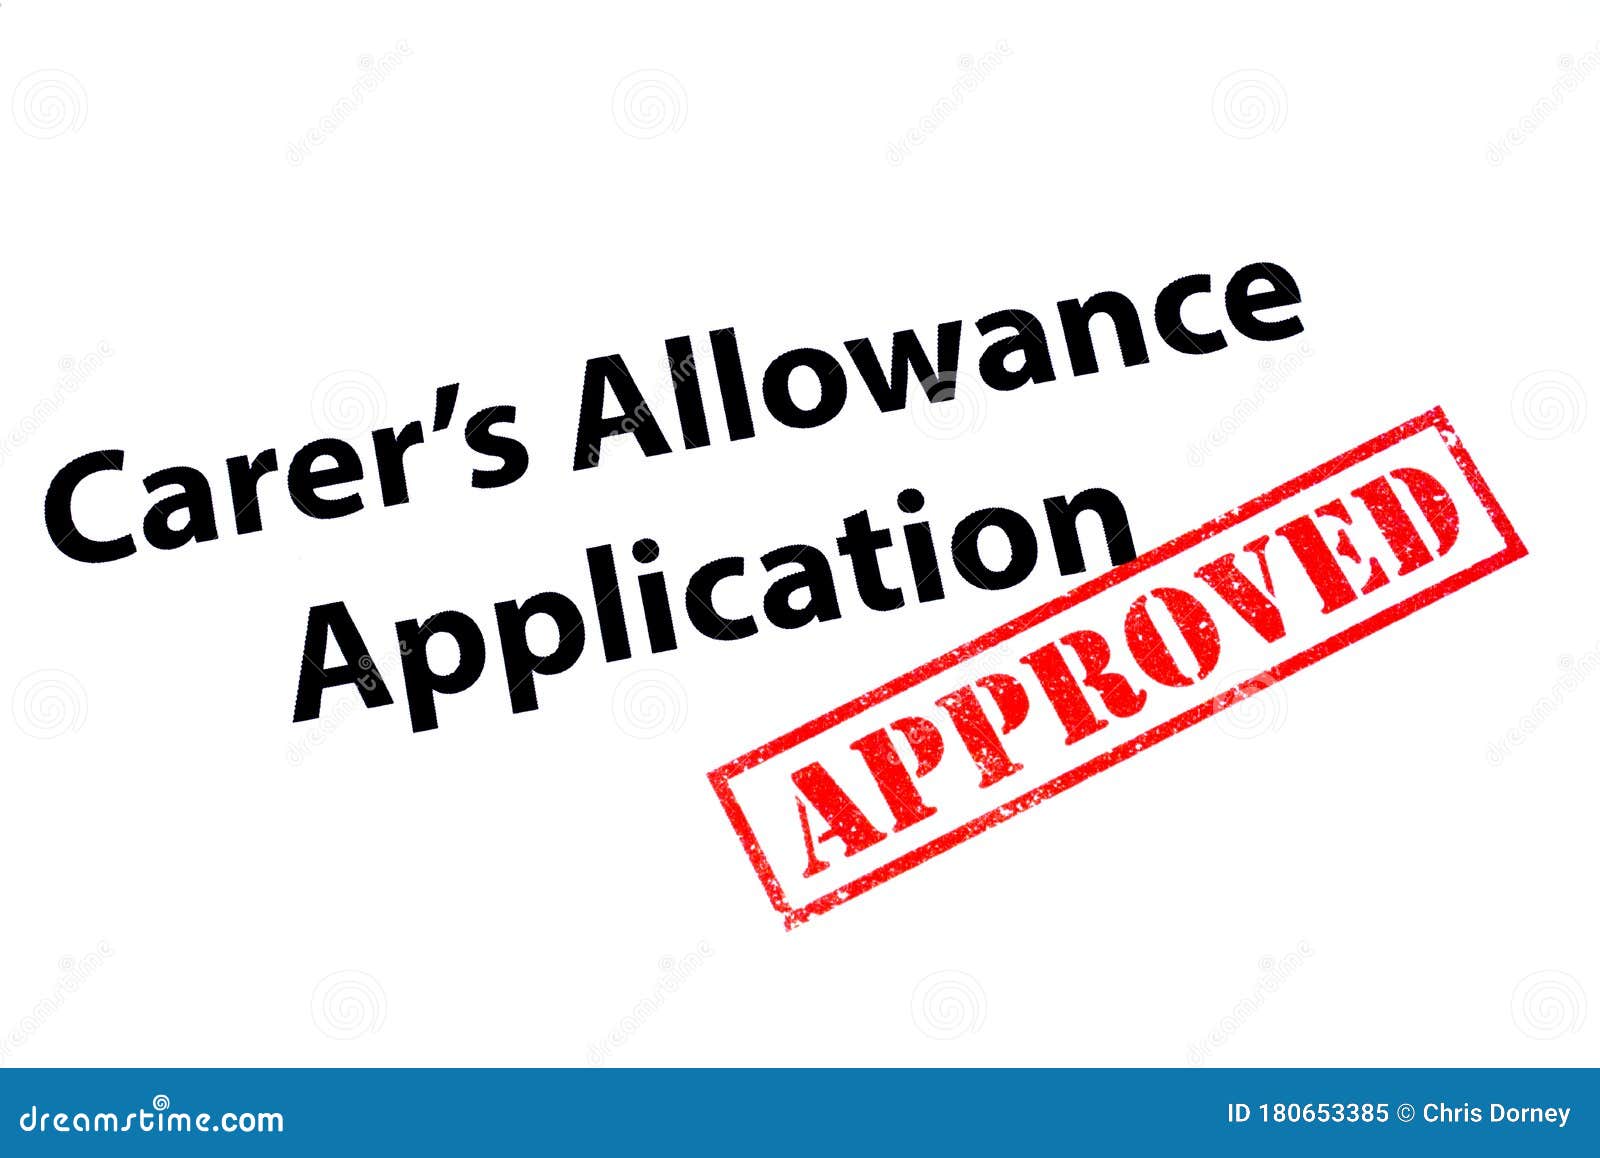 carers allowance application approved